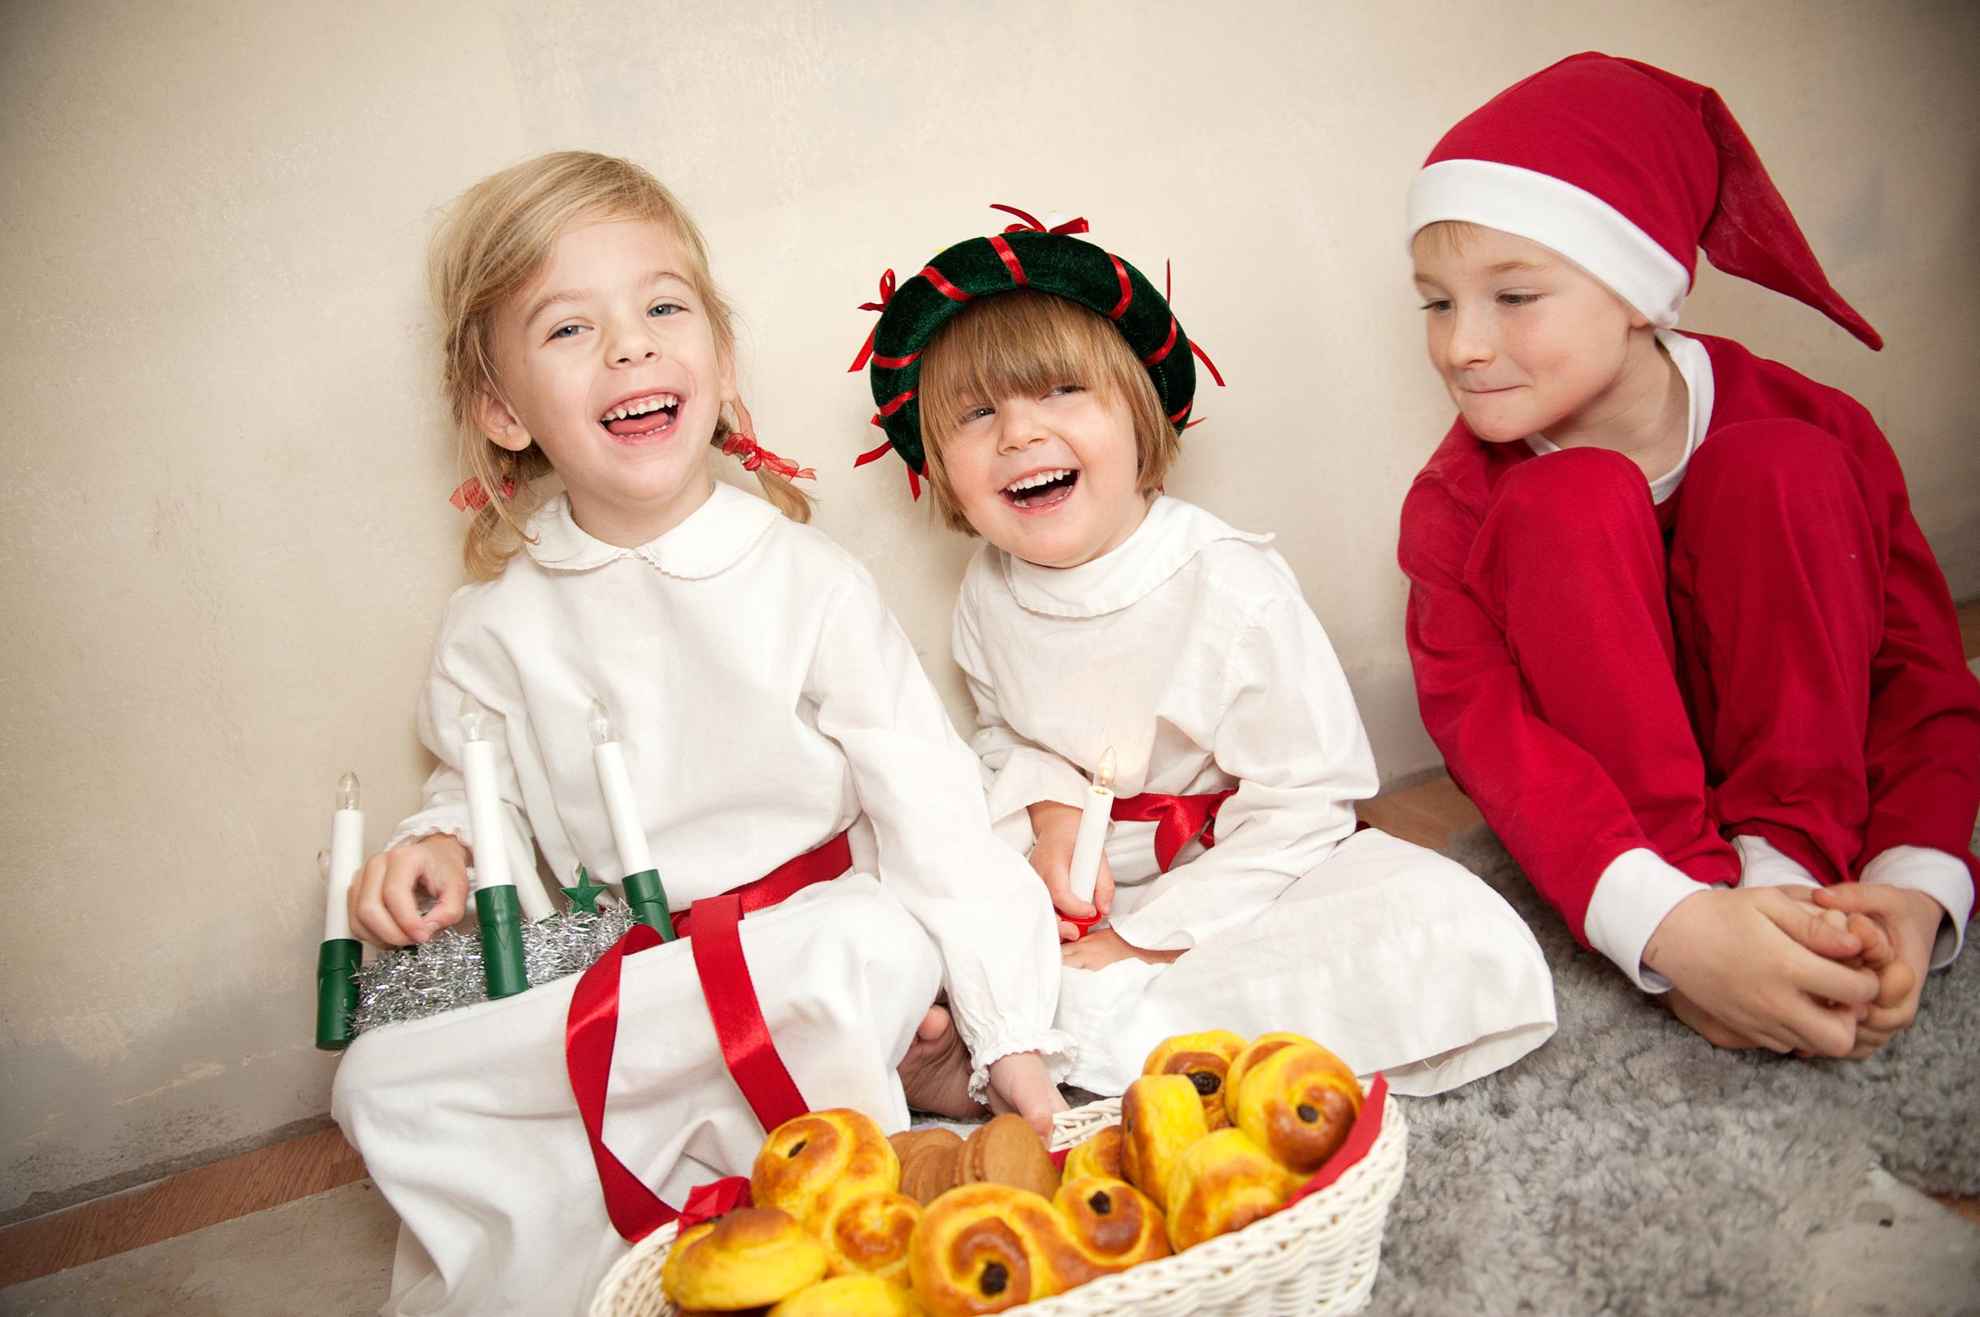 Three kids sit down, dressed as Lucia, a handmaiden and an elf or little santa.